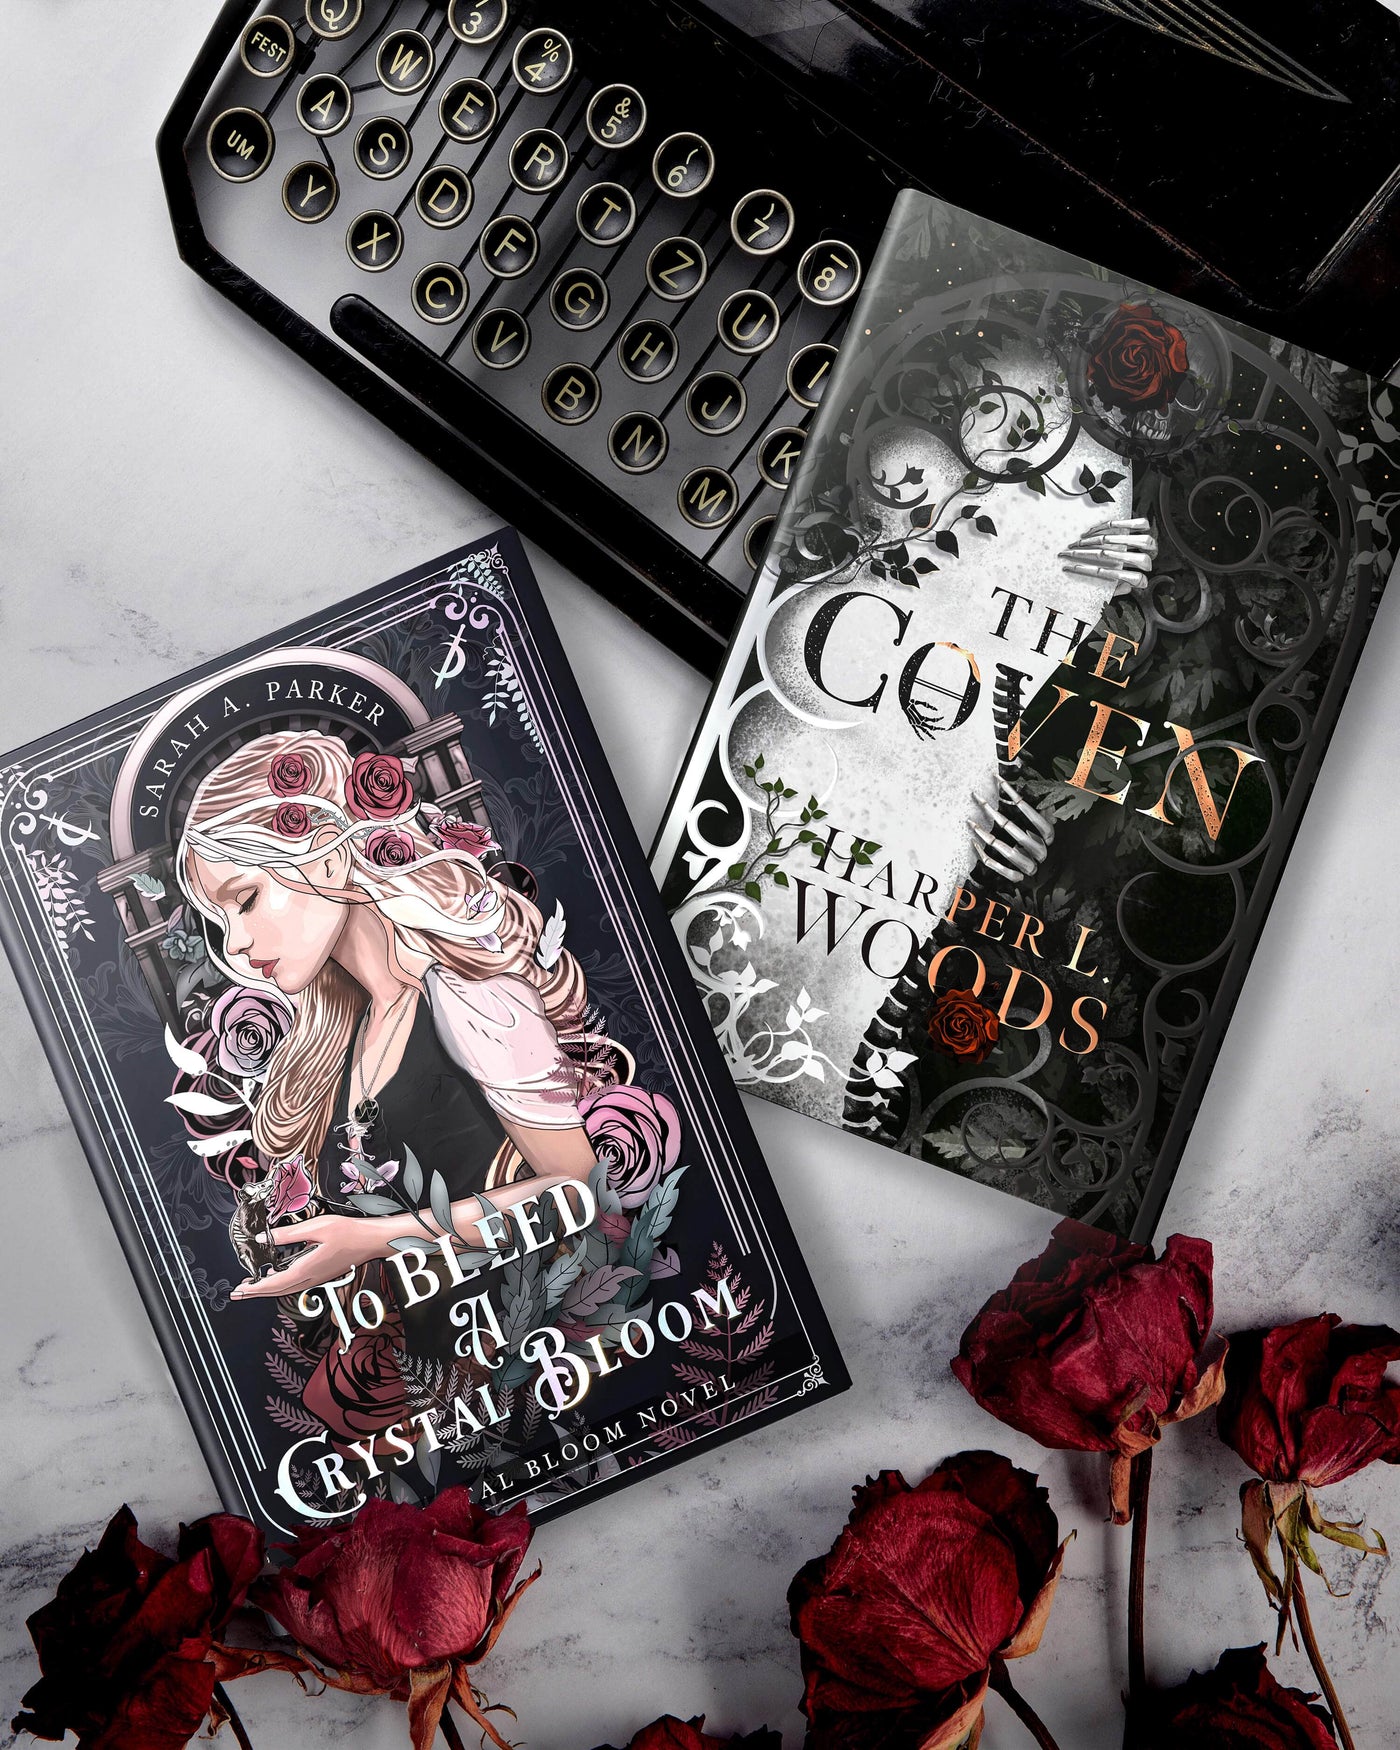 Lit Haven Booktique Book Bundle Waitlist | The Coven & To Bleed A Crystal Bloom